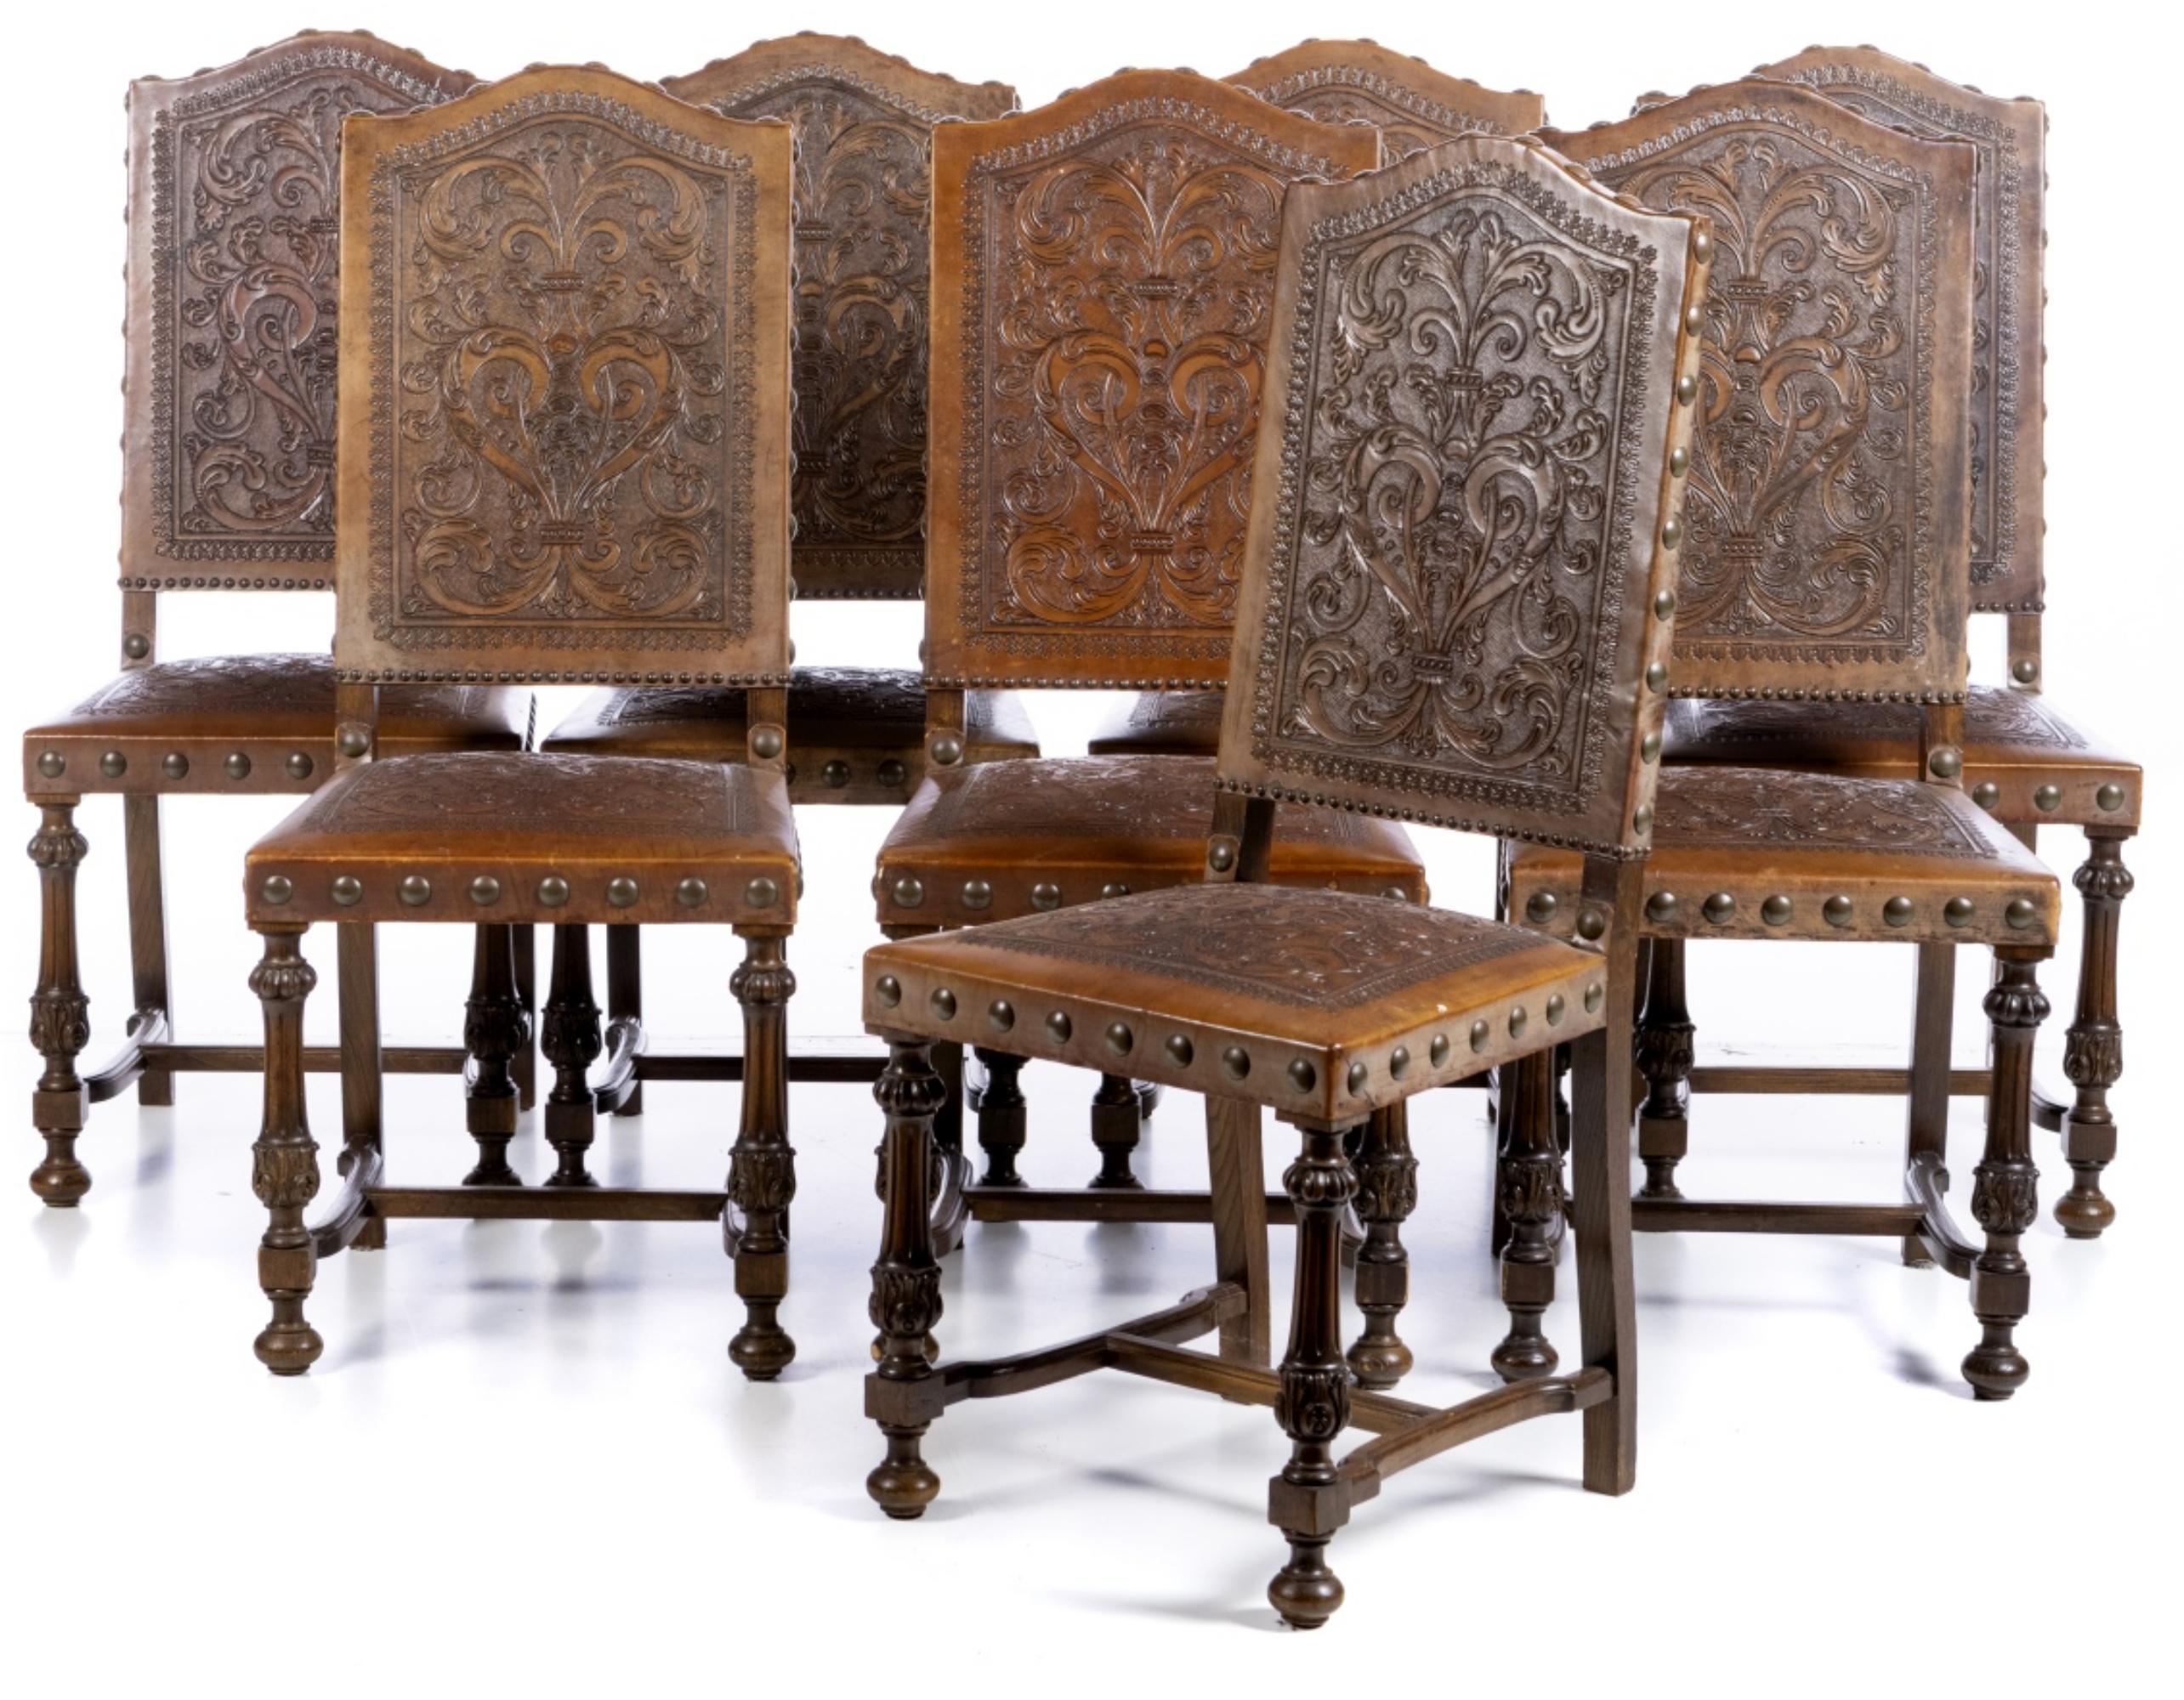 Set of 8 chairs
Portuguese,
begin 20th century
in chestnut wood, seats and back in leather with studs.
Signs of use.
Dim.: 110 x 47 x 45 cm.